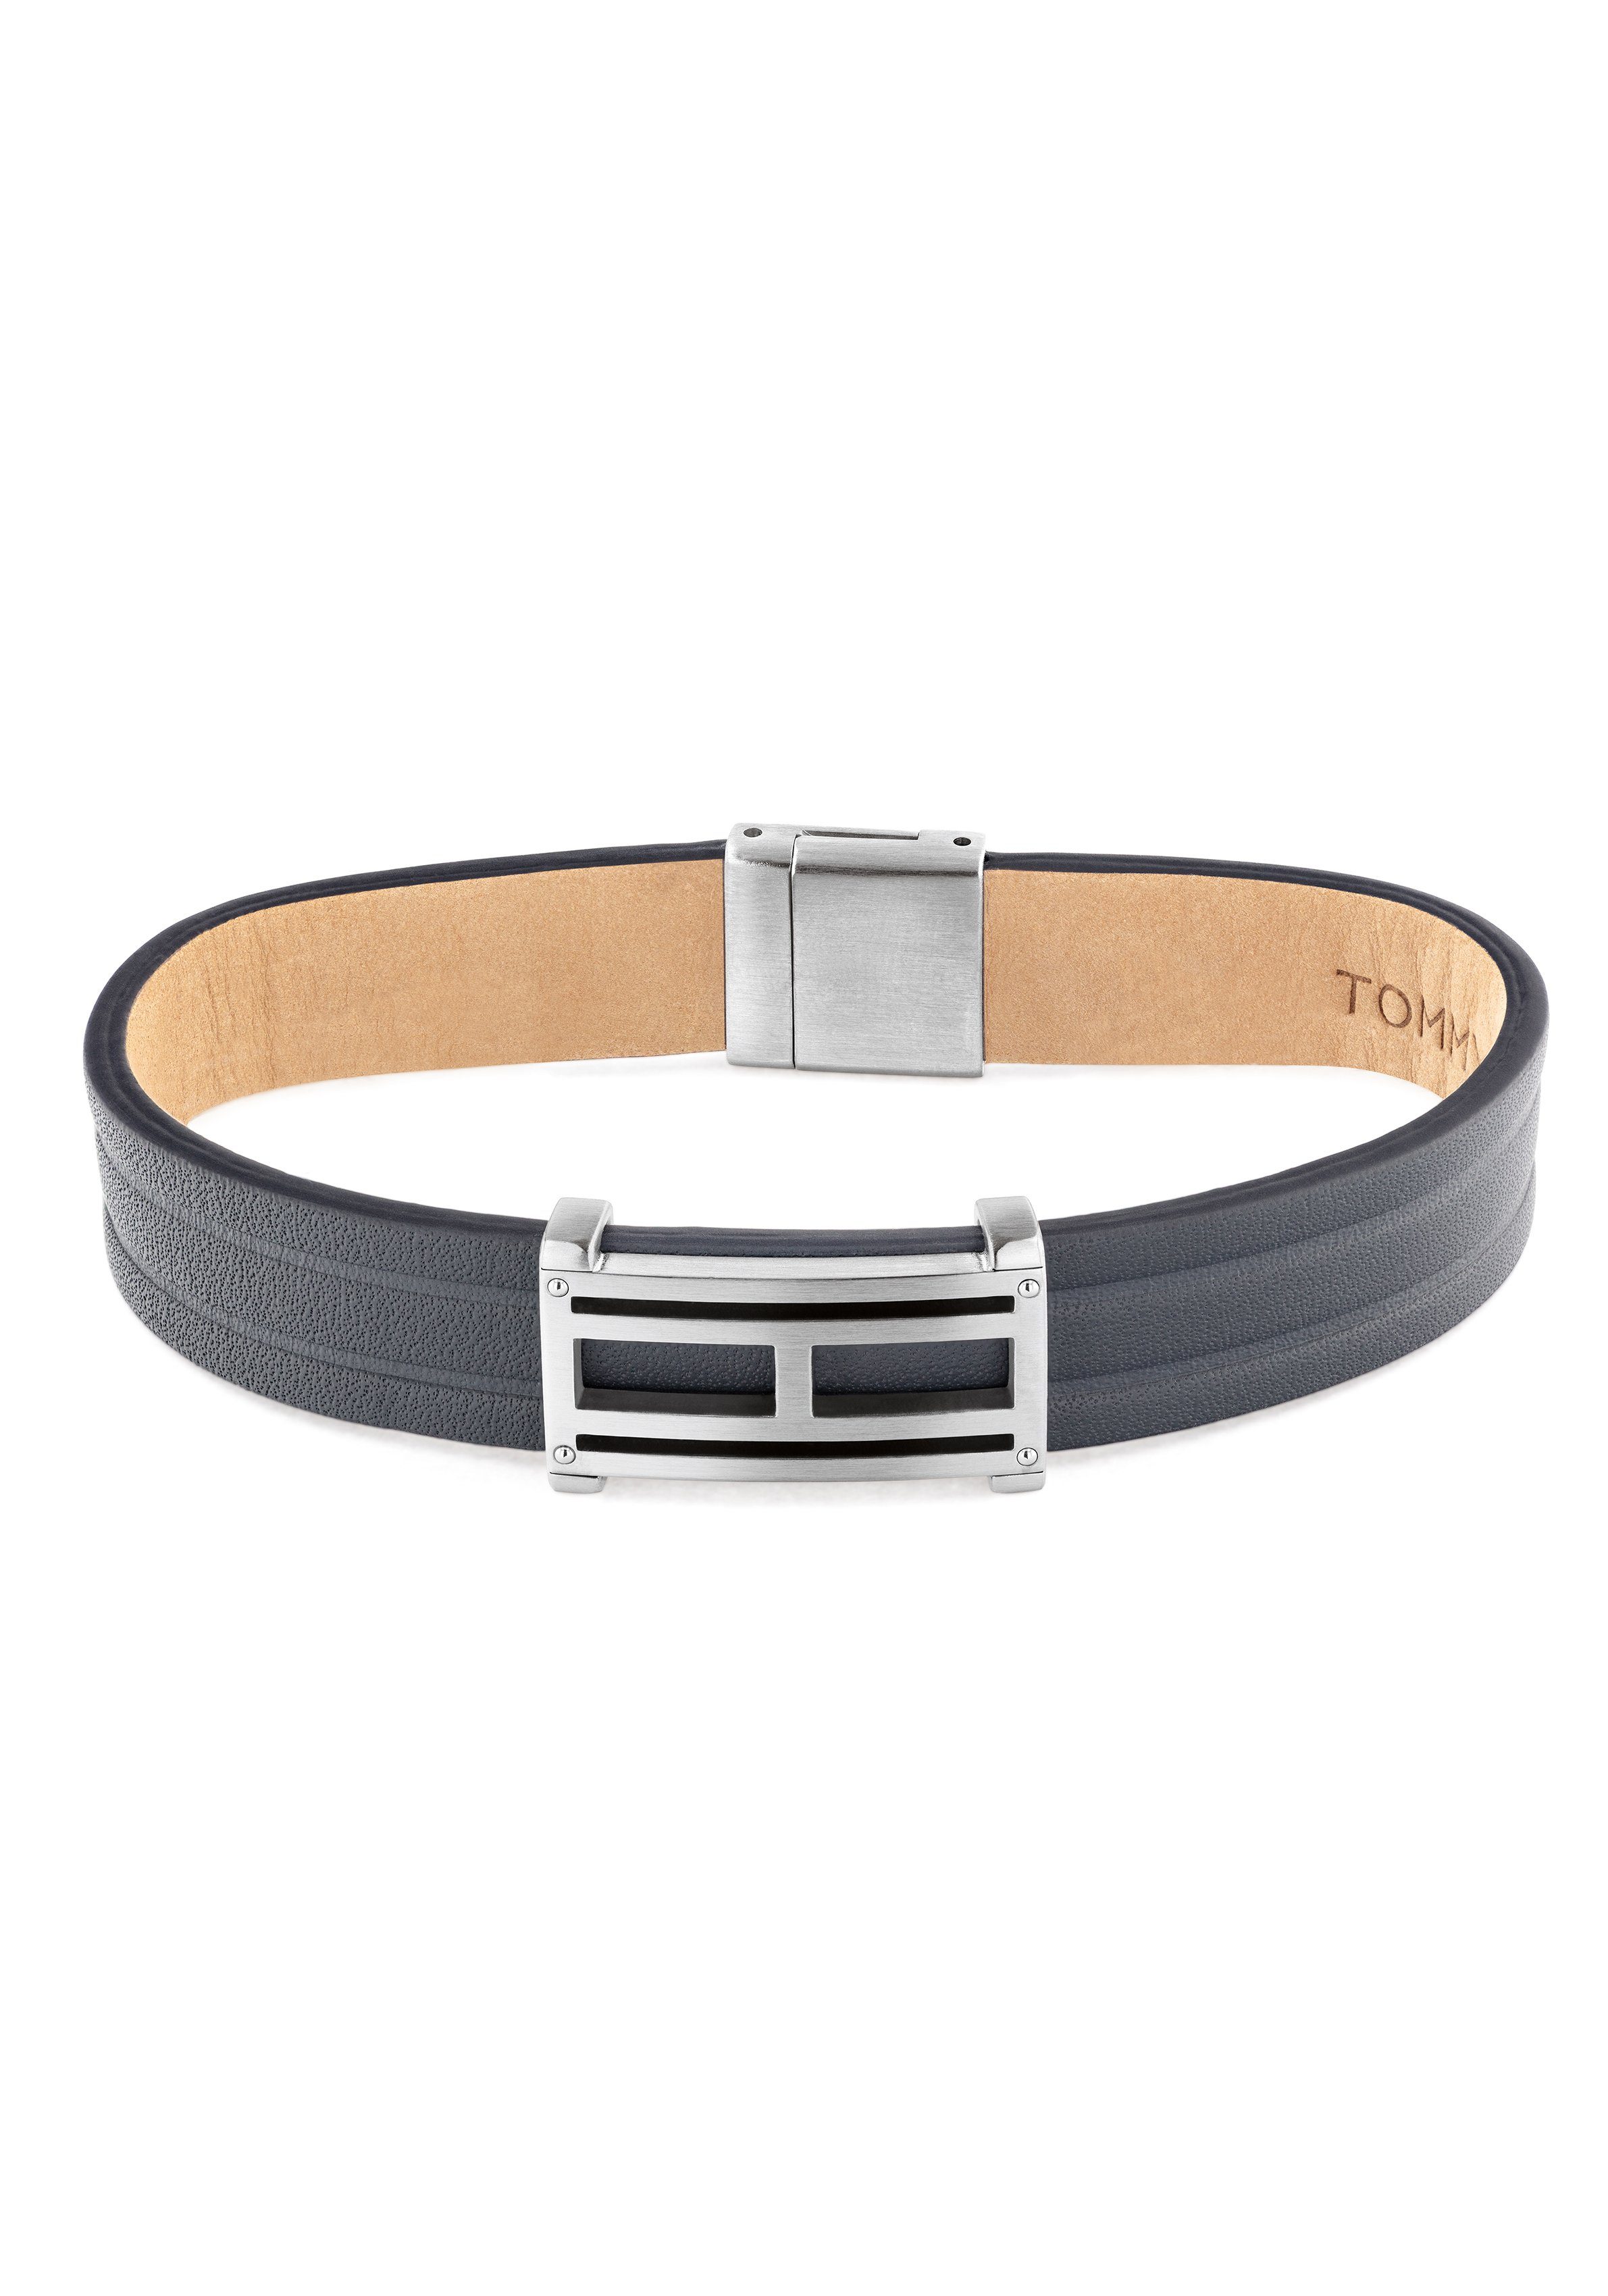 Tommy Hilfiger Armband »CASUAL CORE, 2790269S, 2790269L« online kaufen |  OTTO